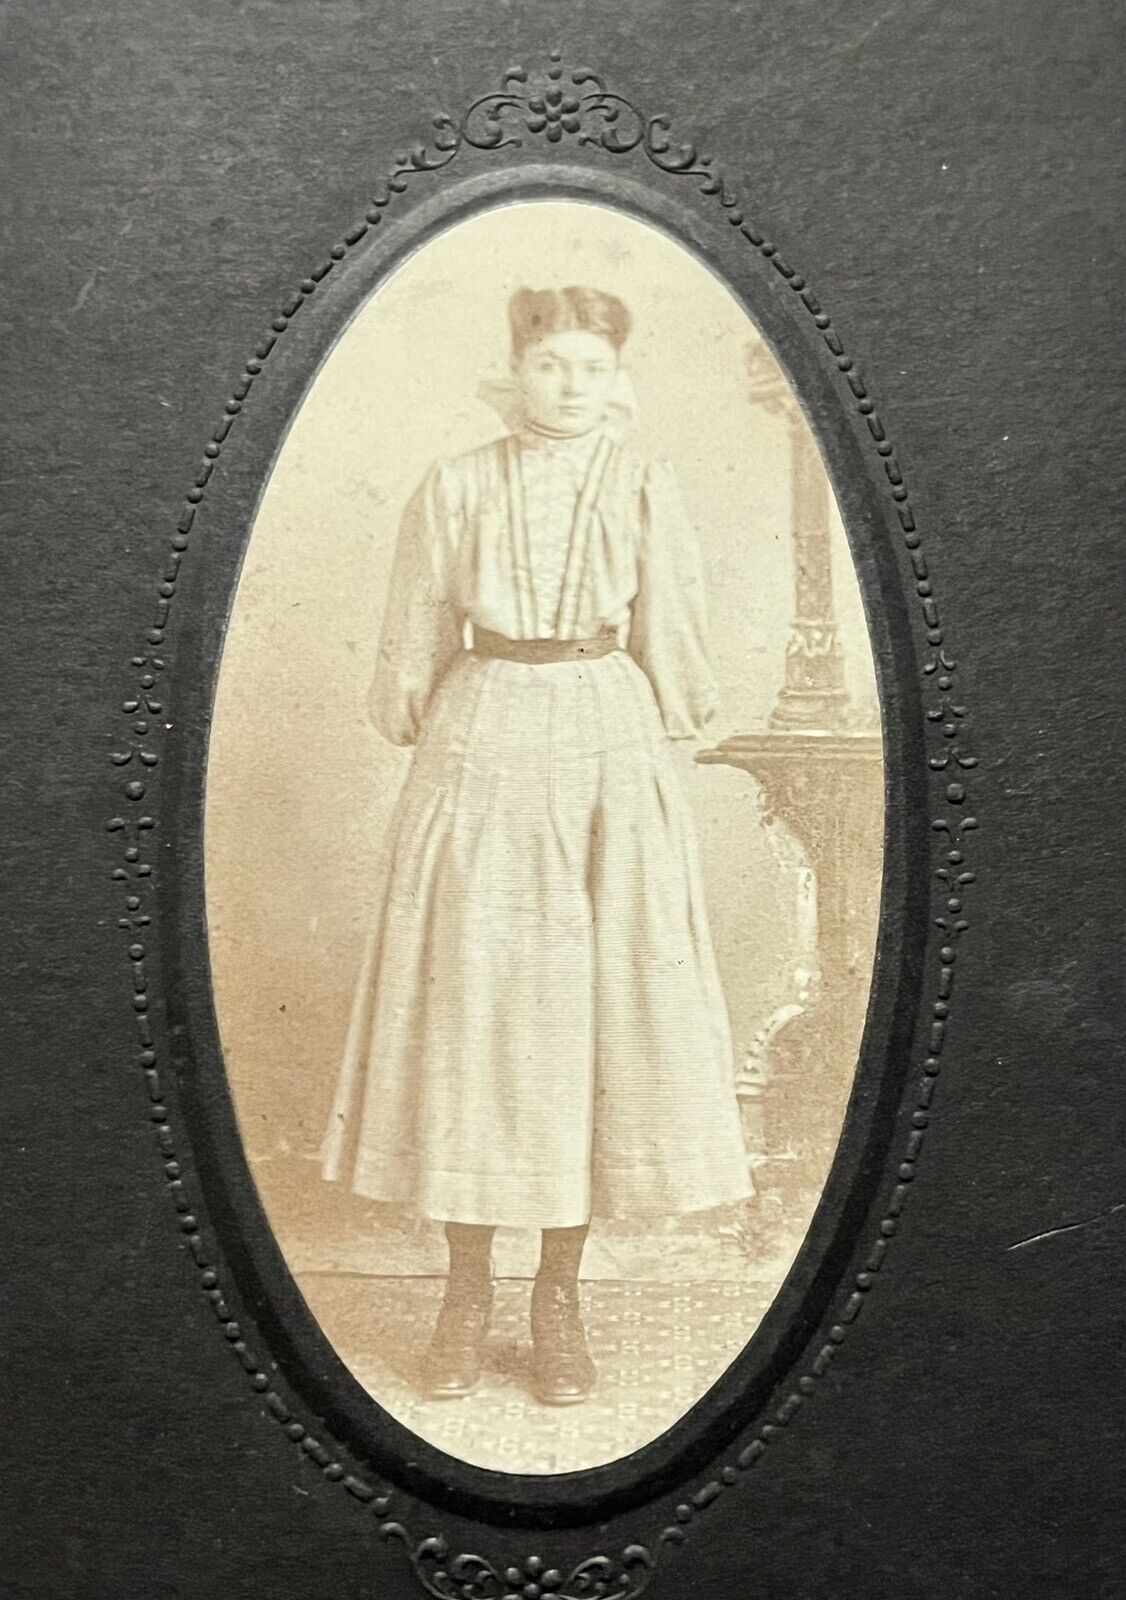 Antique Photo. Young Girl In Pioneer Dress. Estimated Age 1890s. Size 3.5 X 6.5